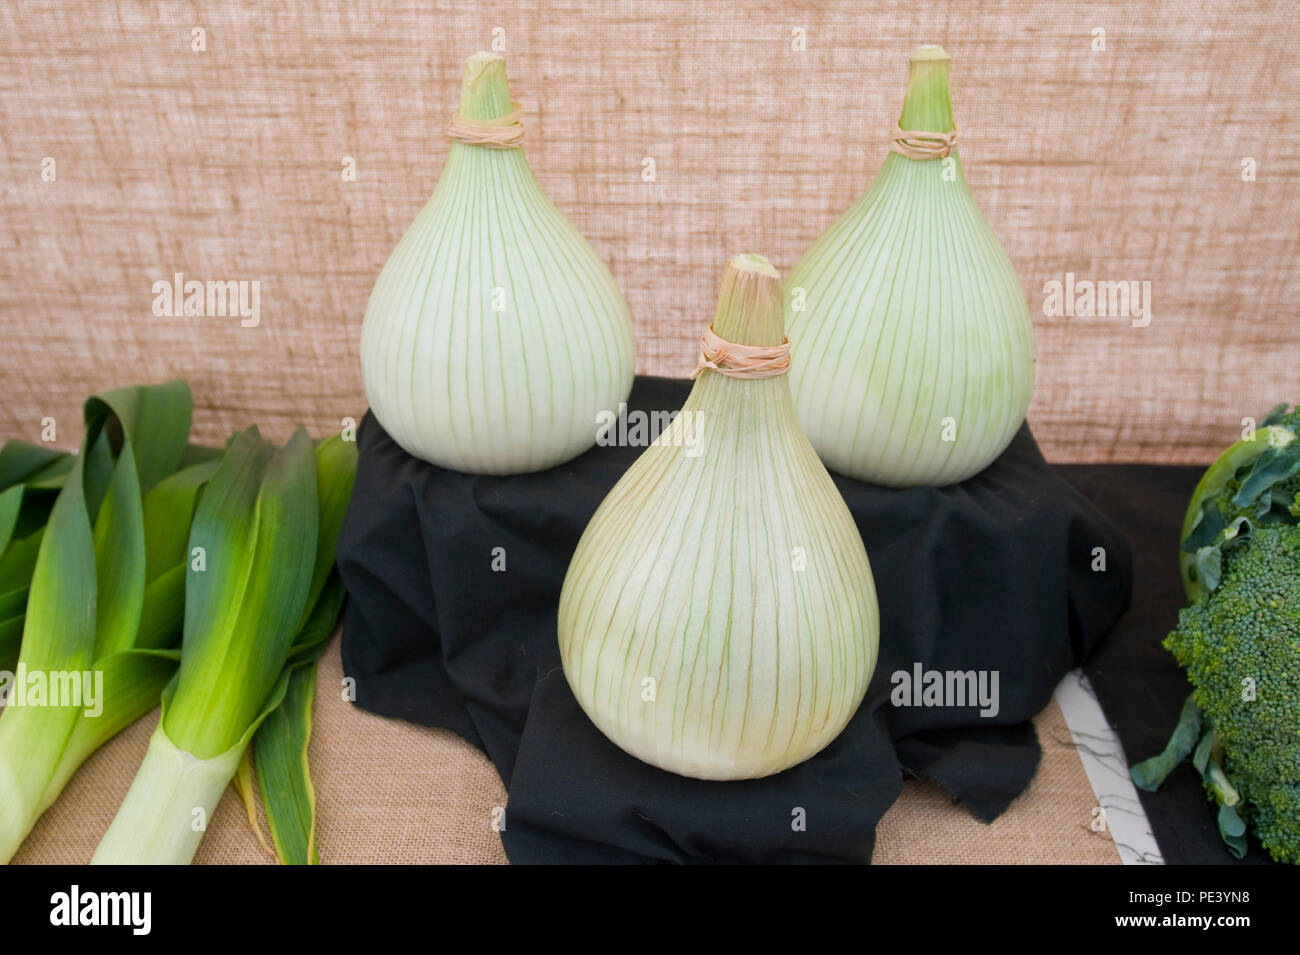 Onions exhibited at RHS Tatton Park flower show Cheshire England UK Stock Photo